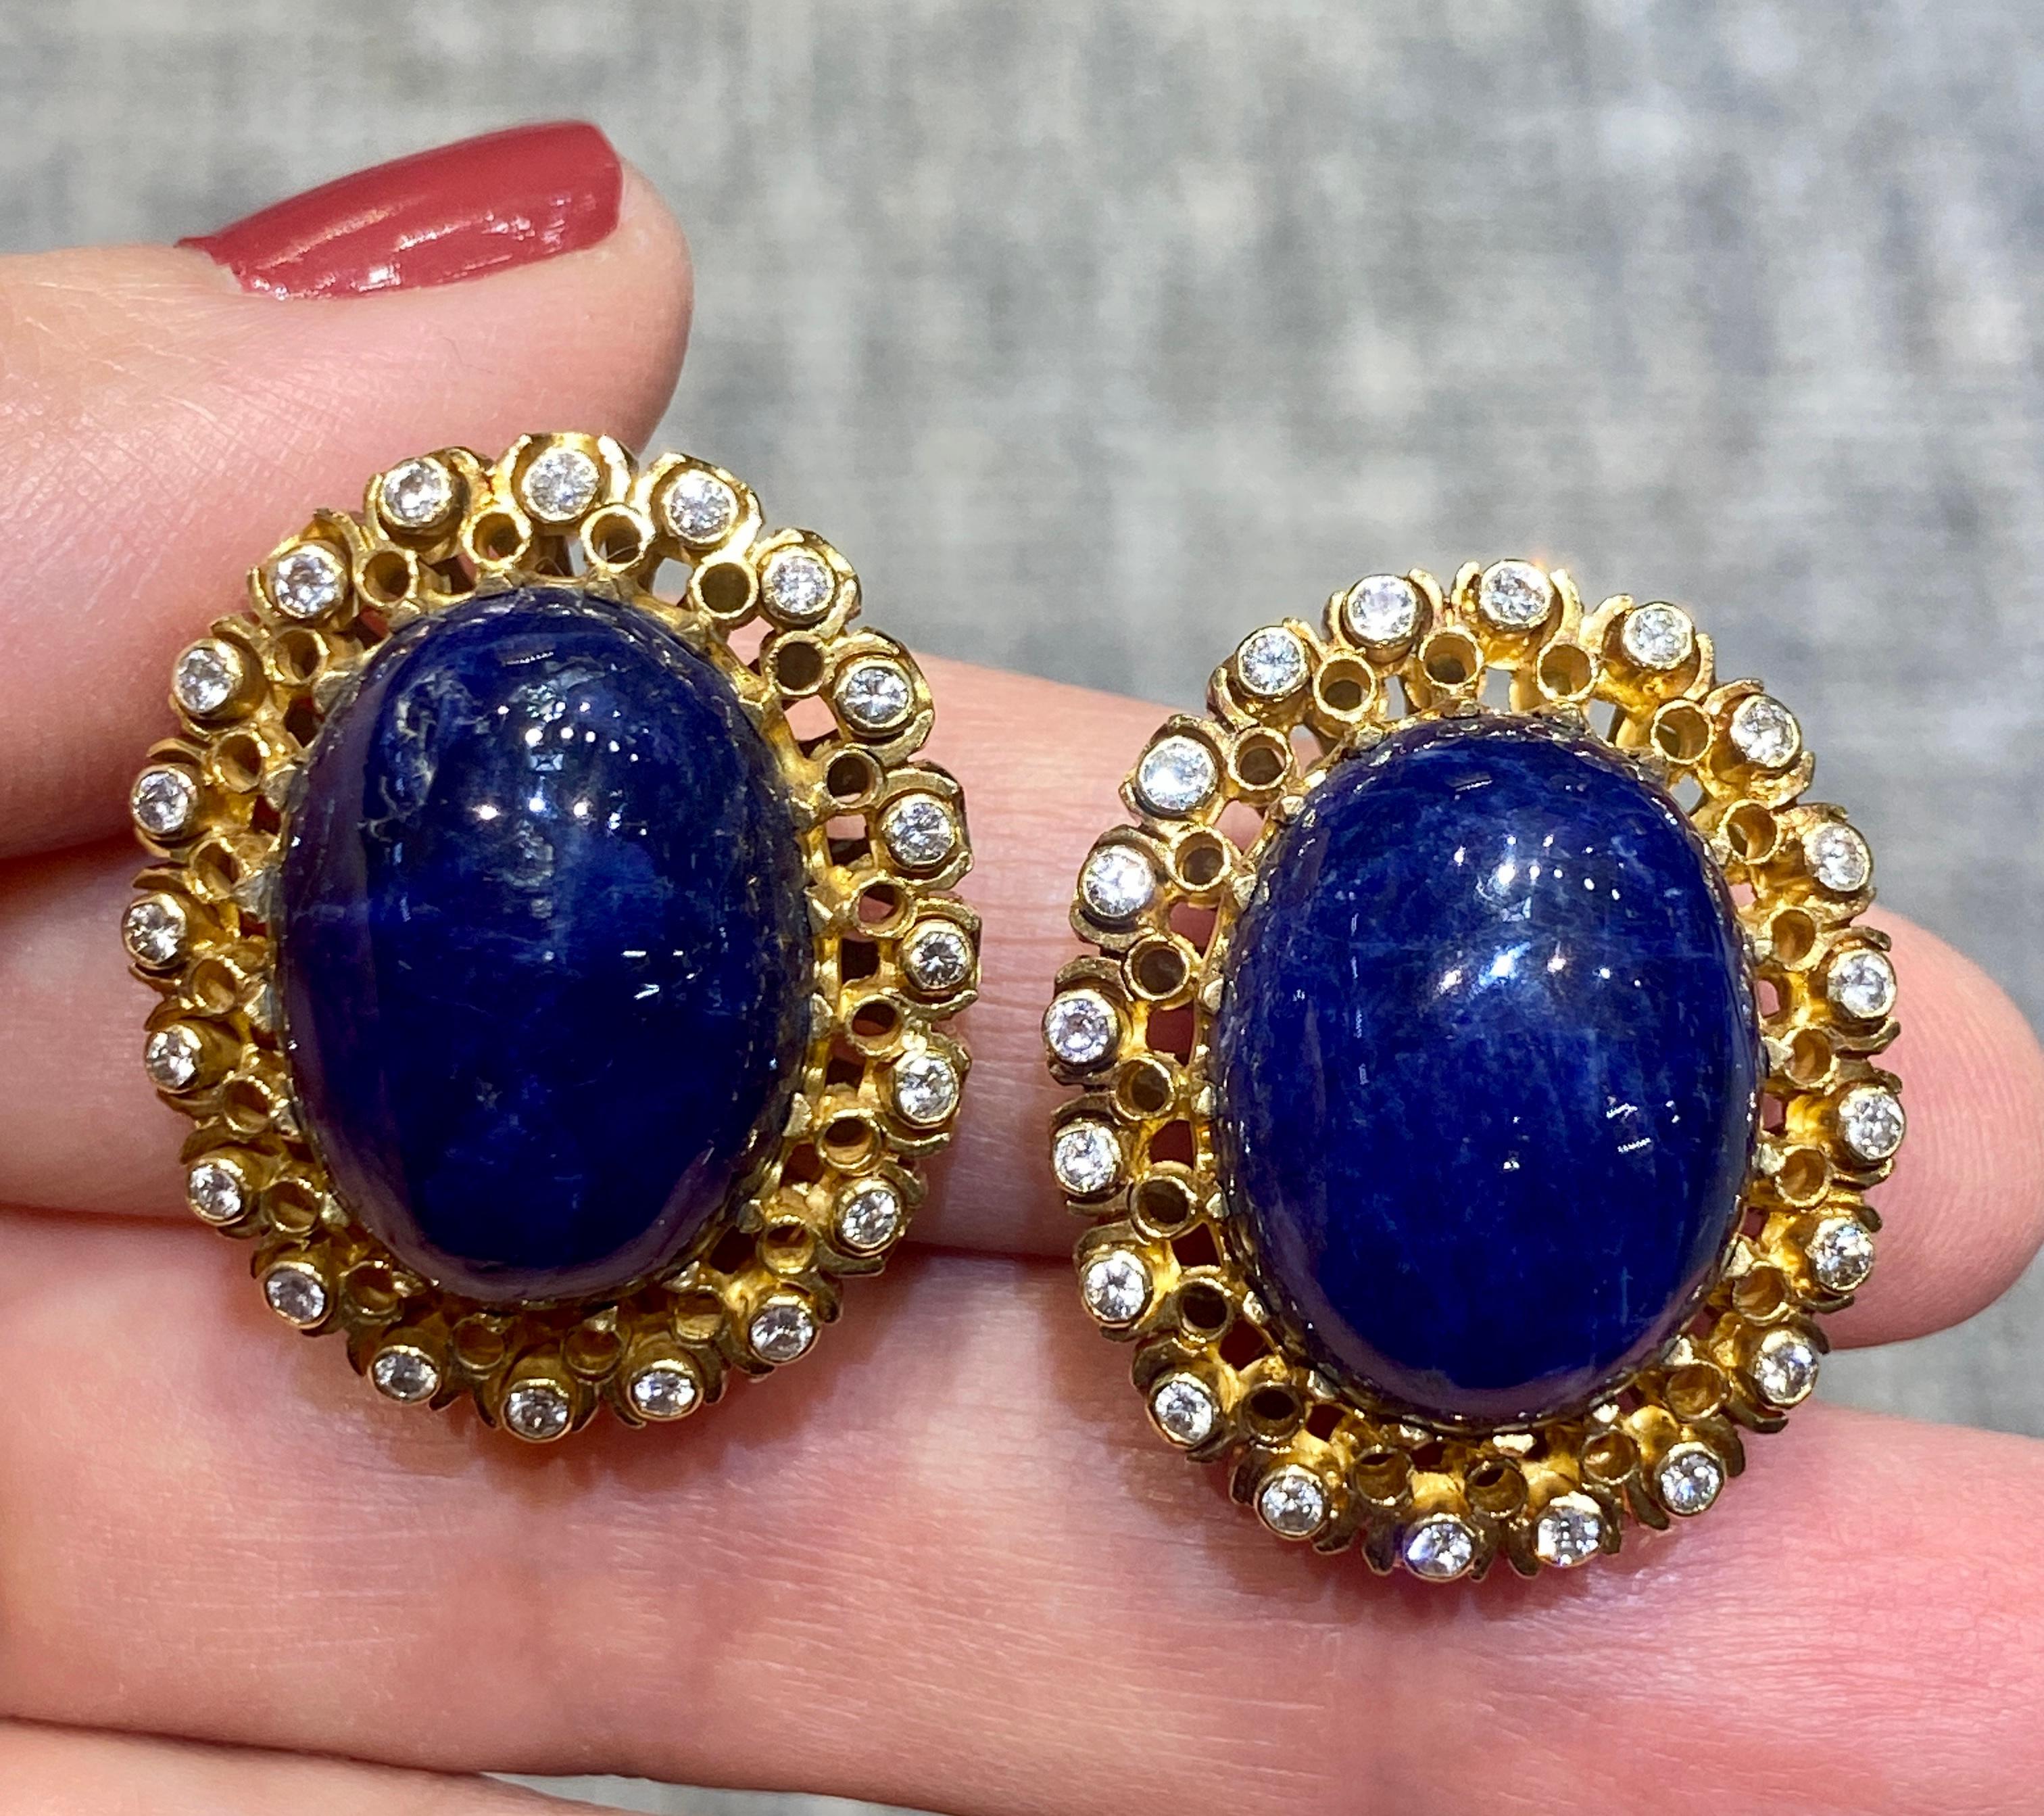 These beautiful 18k gold Lalaounis clip-on earrings consist of cabochon lapis lazuli surrounded by diamonds. The earrings are part of a set with a matching ring which is listed separately on 1st Dibs.